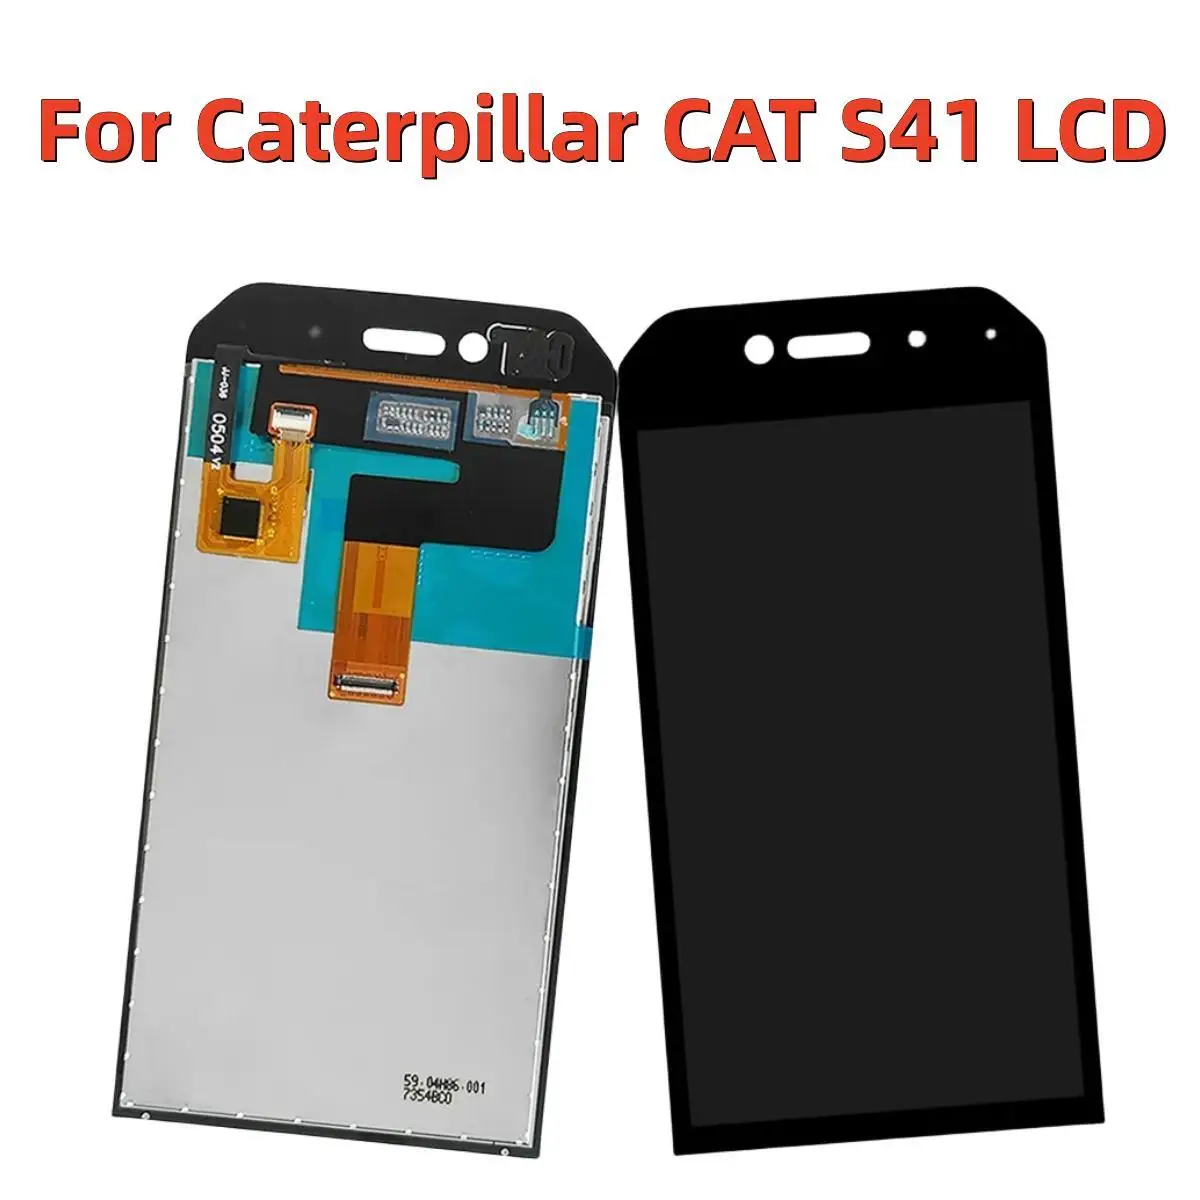 

For Caterpillar CAT S41 LCD Display+Touch Screen Digitizer Assembly LCD Replacement Parts For Caterpillar S41 LCD Replacement